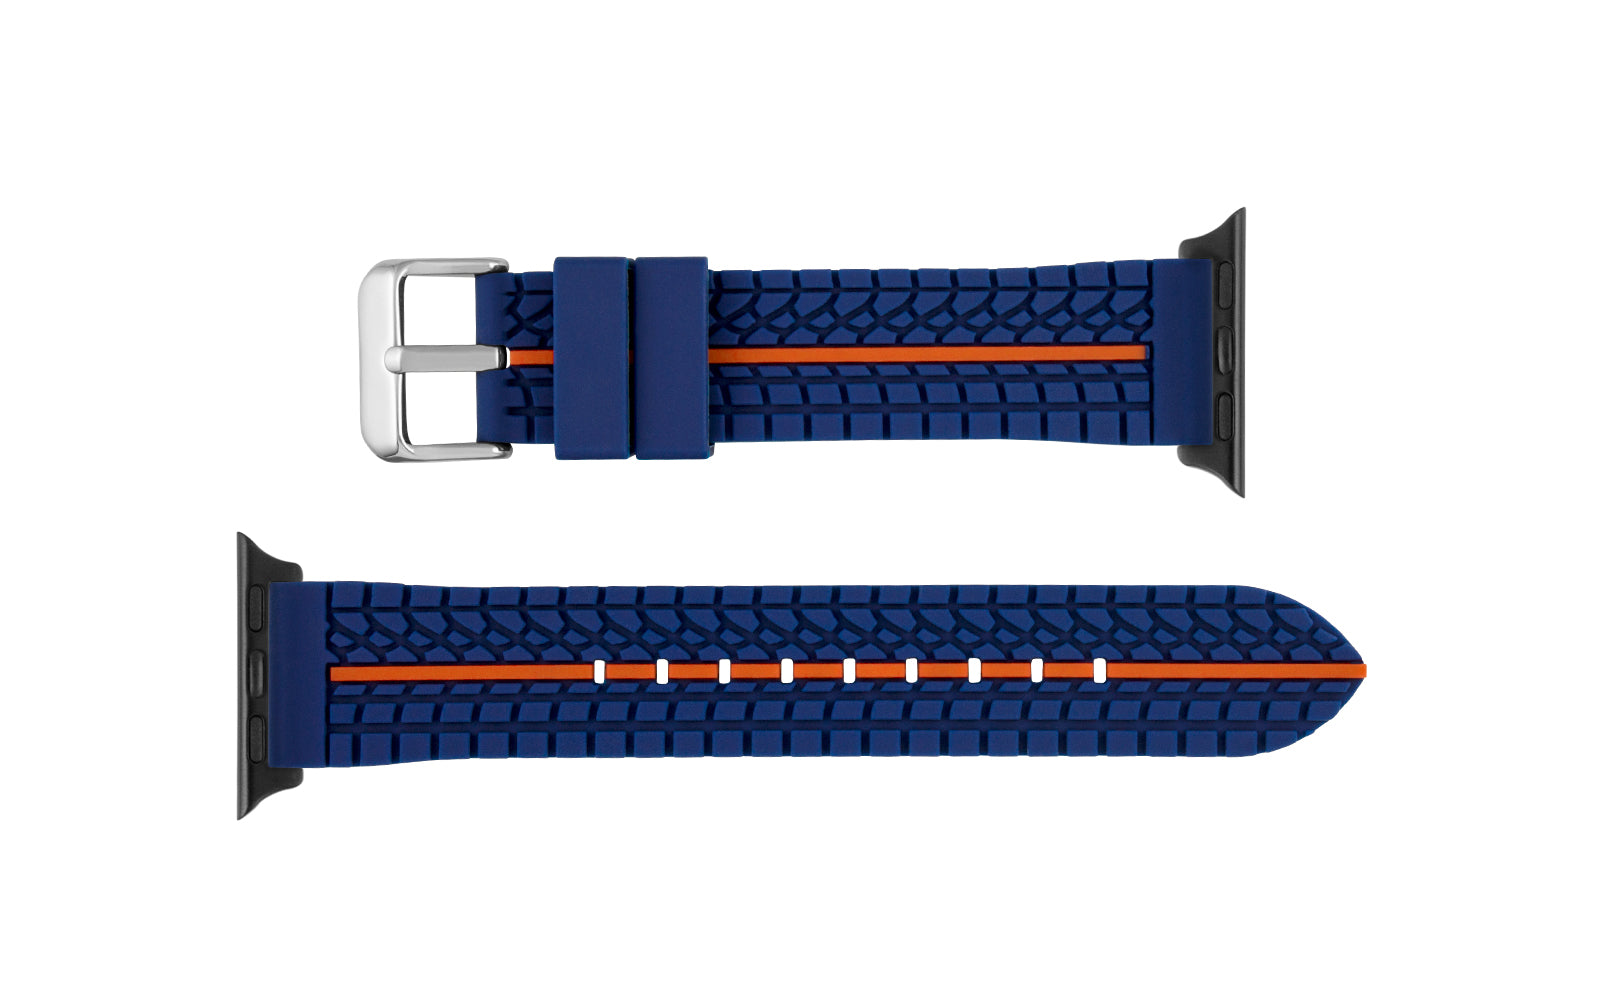 Apple Watch Band - Stainless Steel - Orange Textured Calf Leather